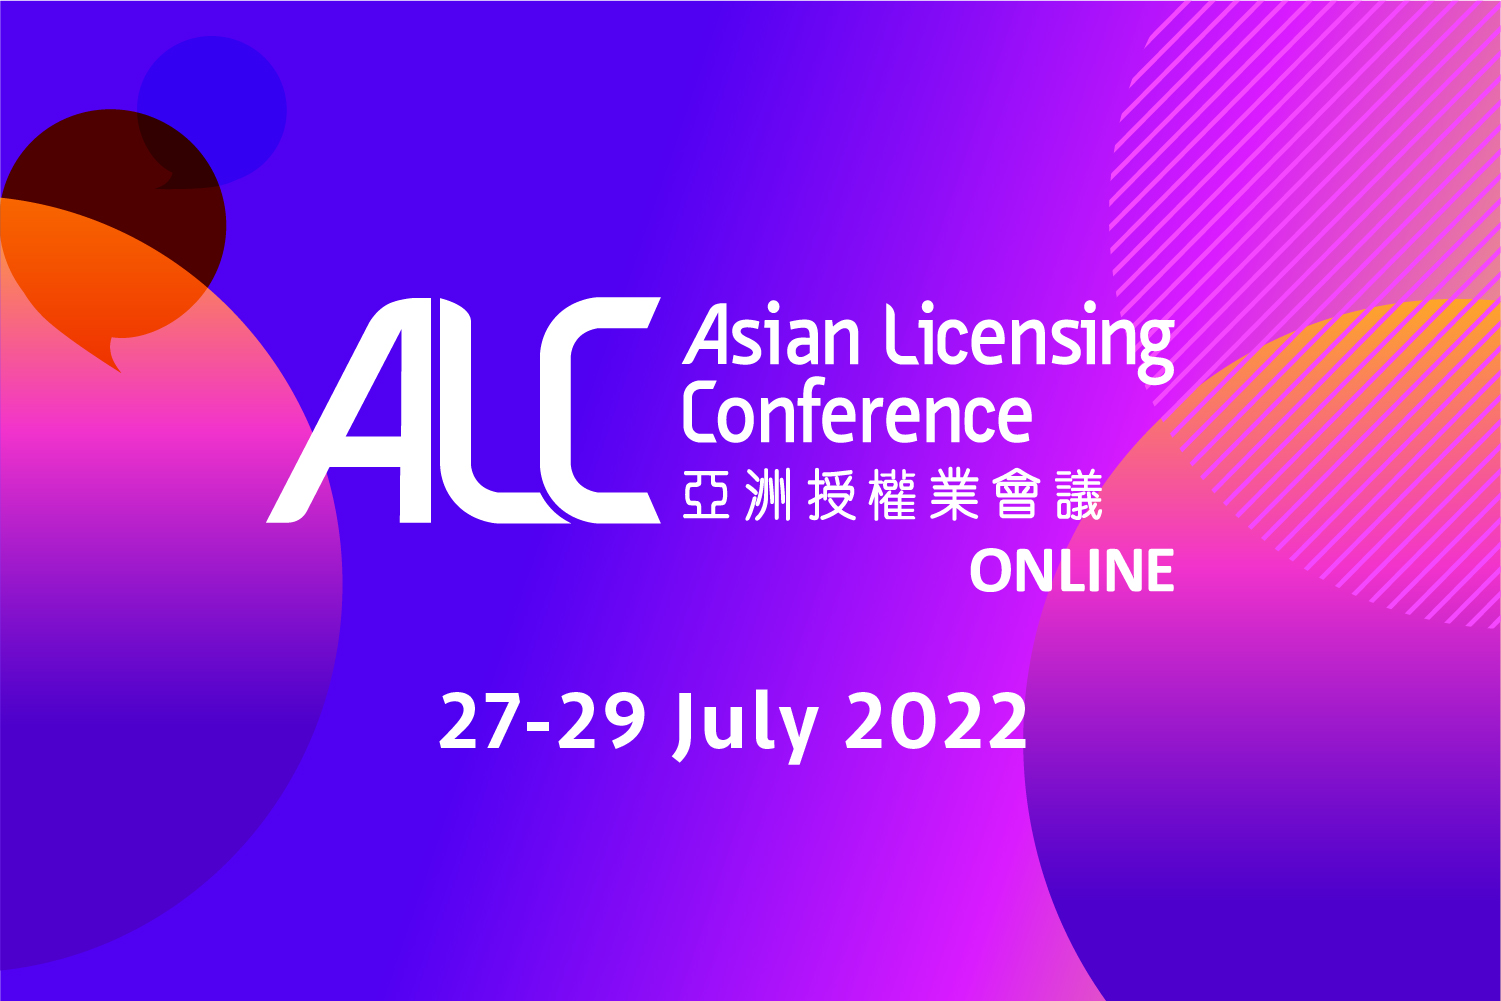 Asian Licensing Conference